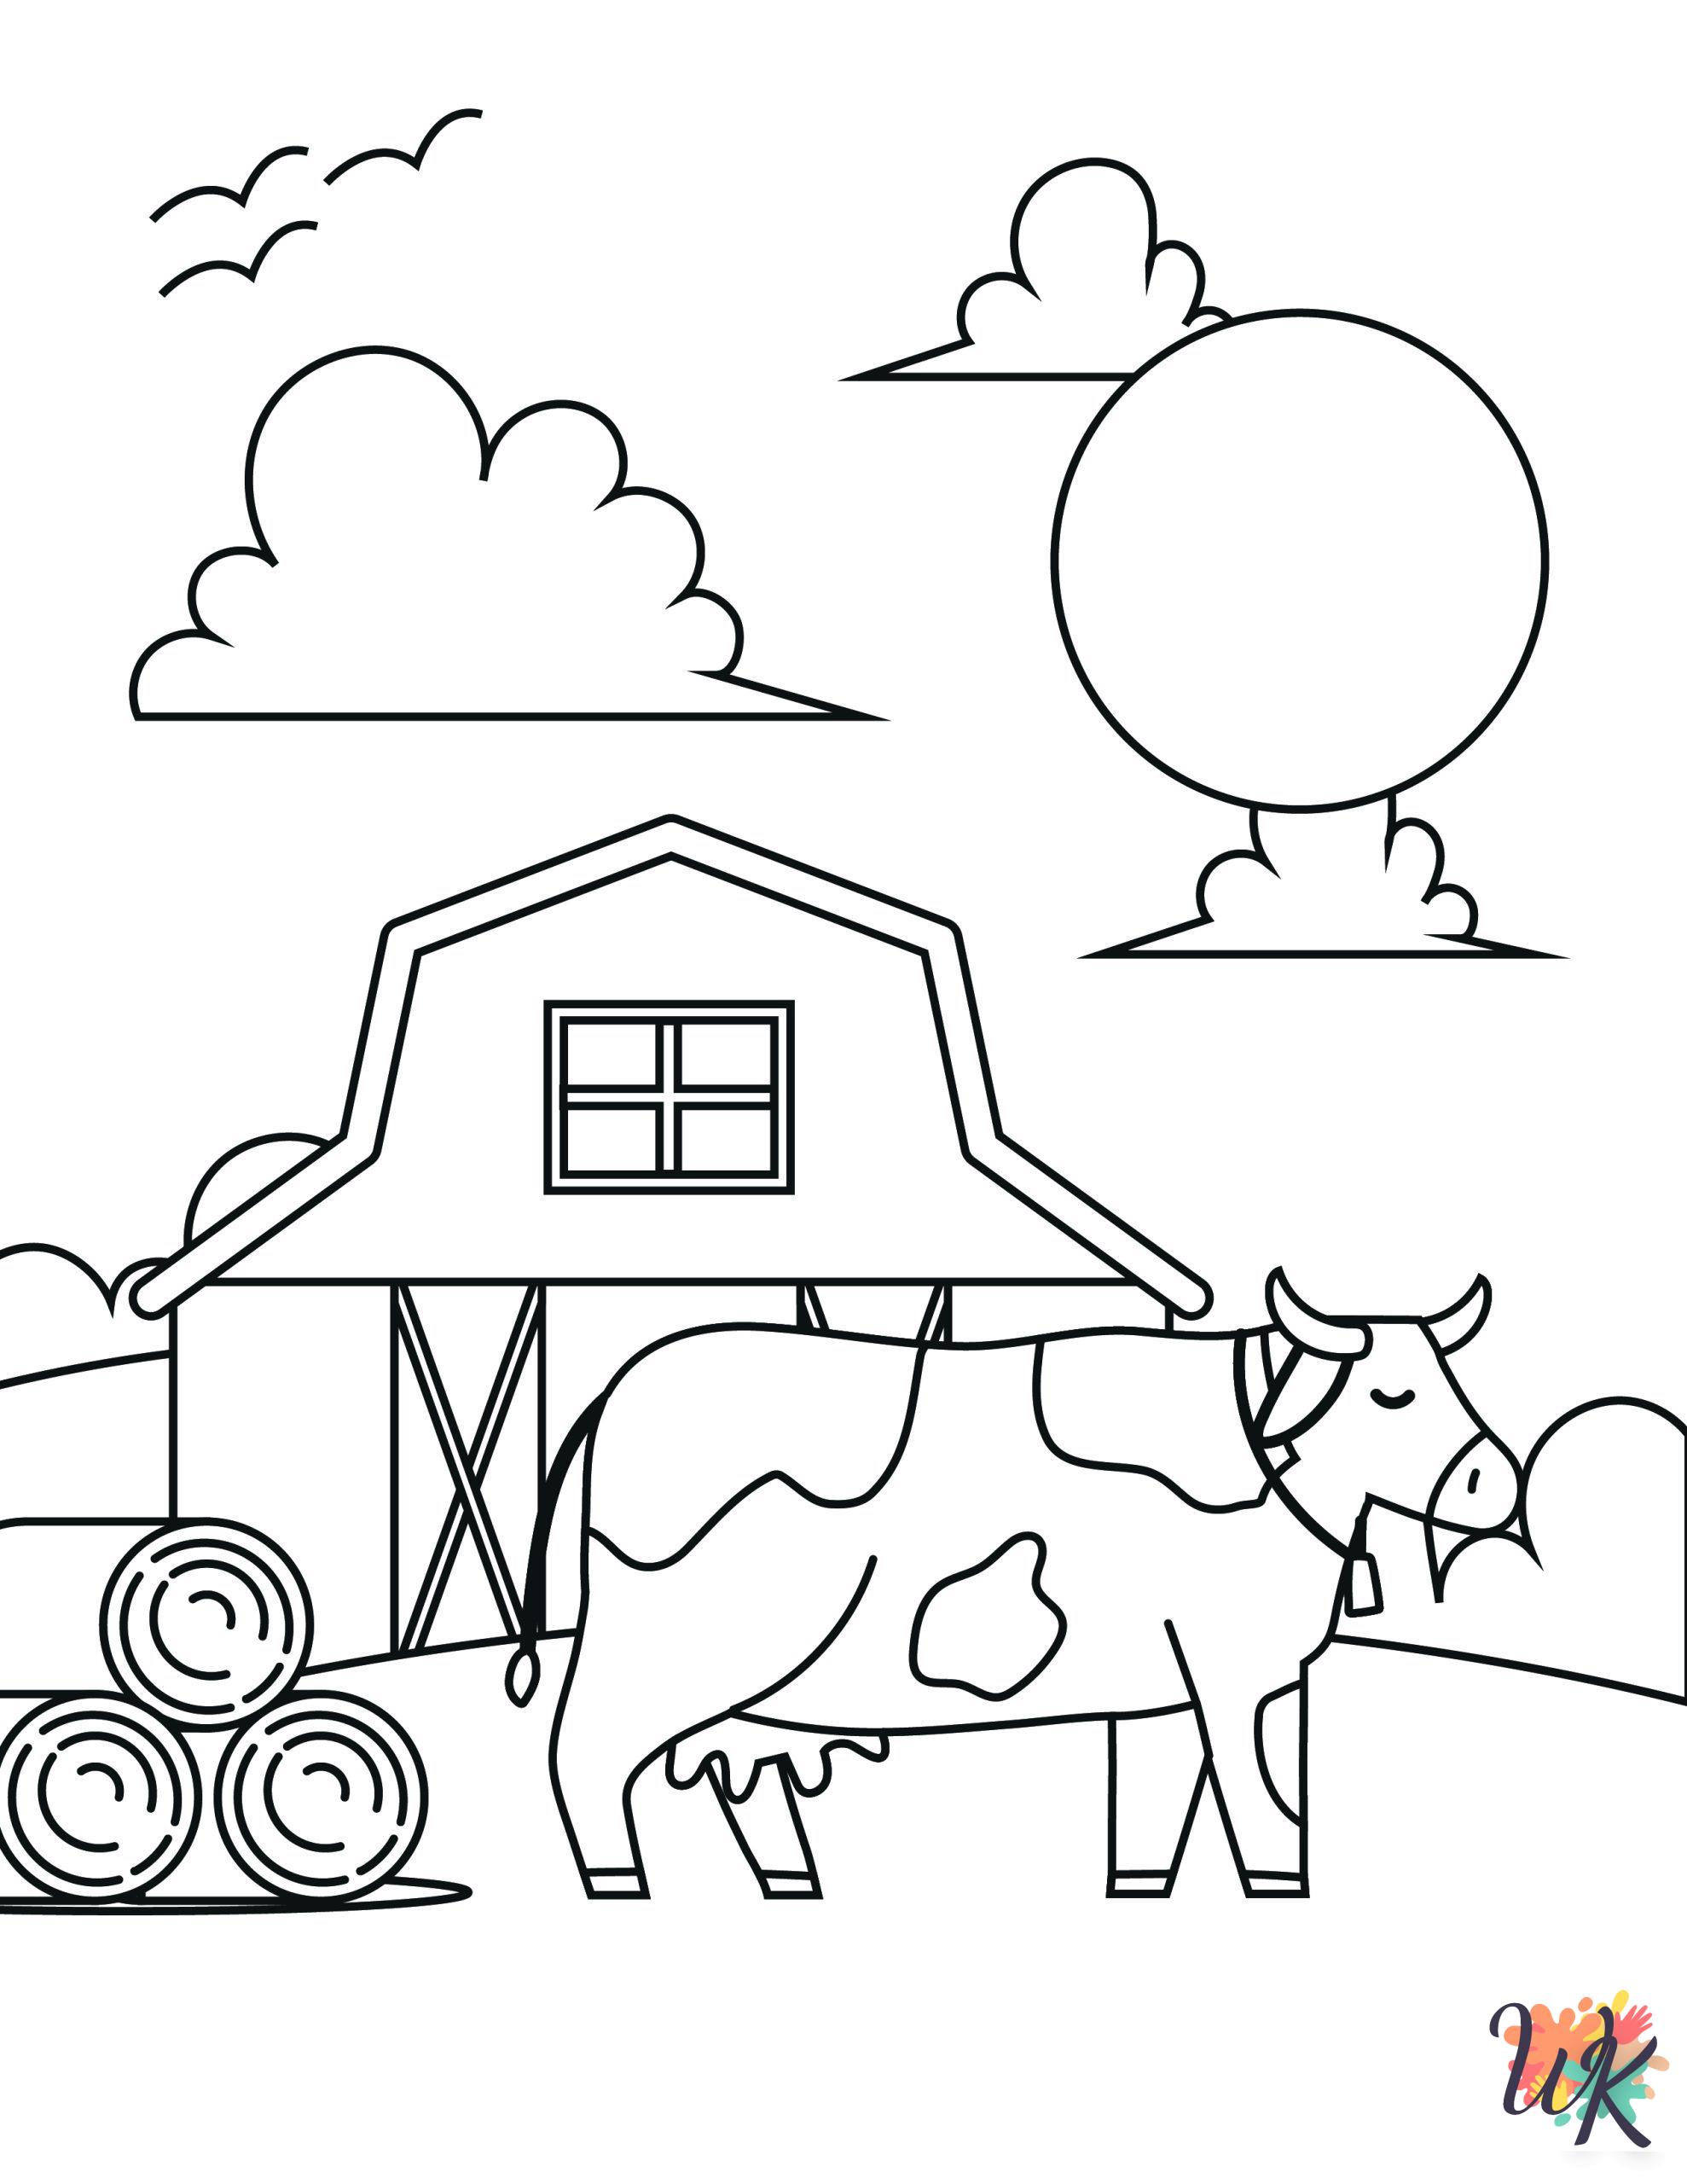 printable Cow coloring pages